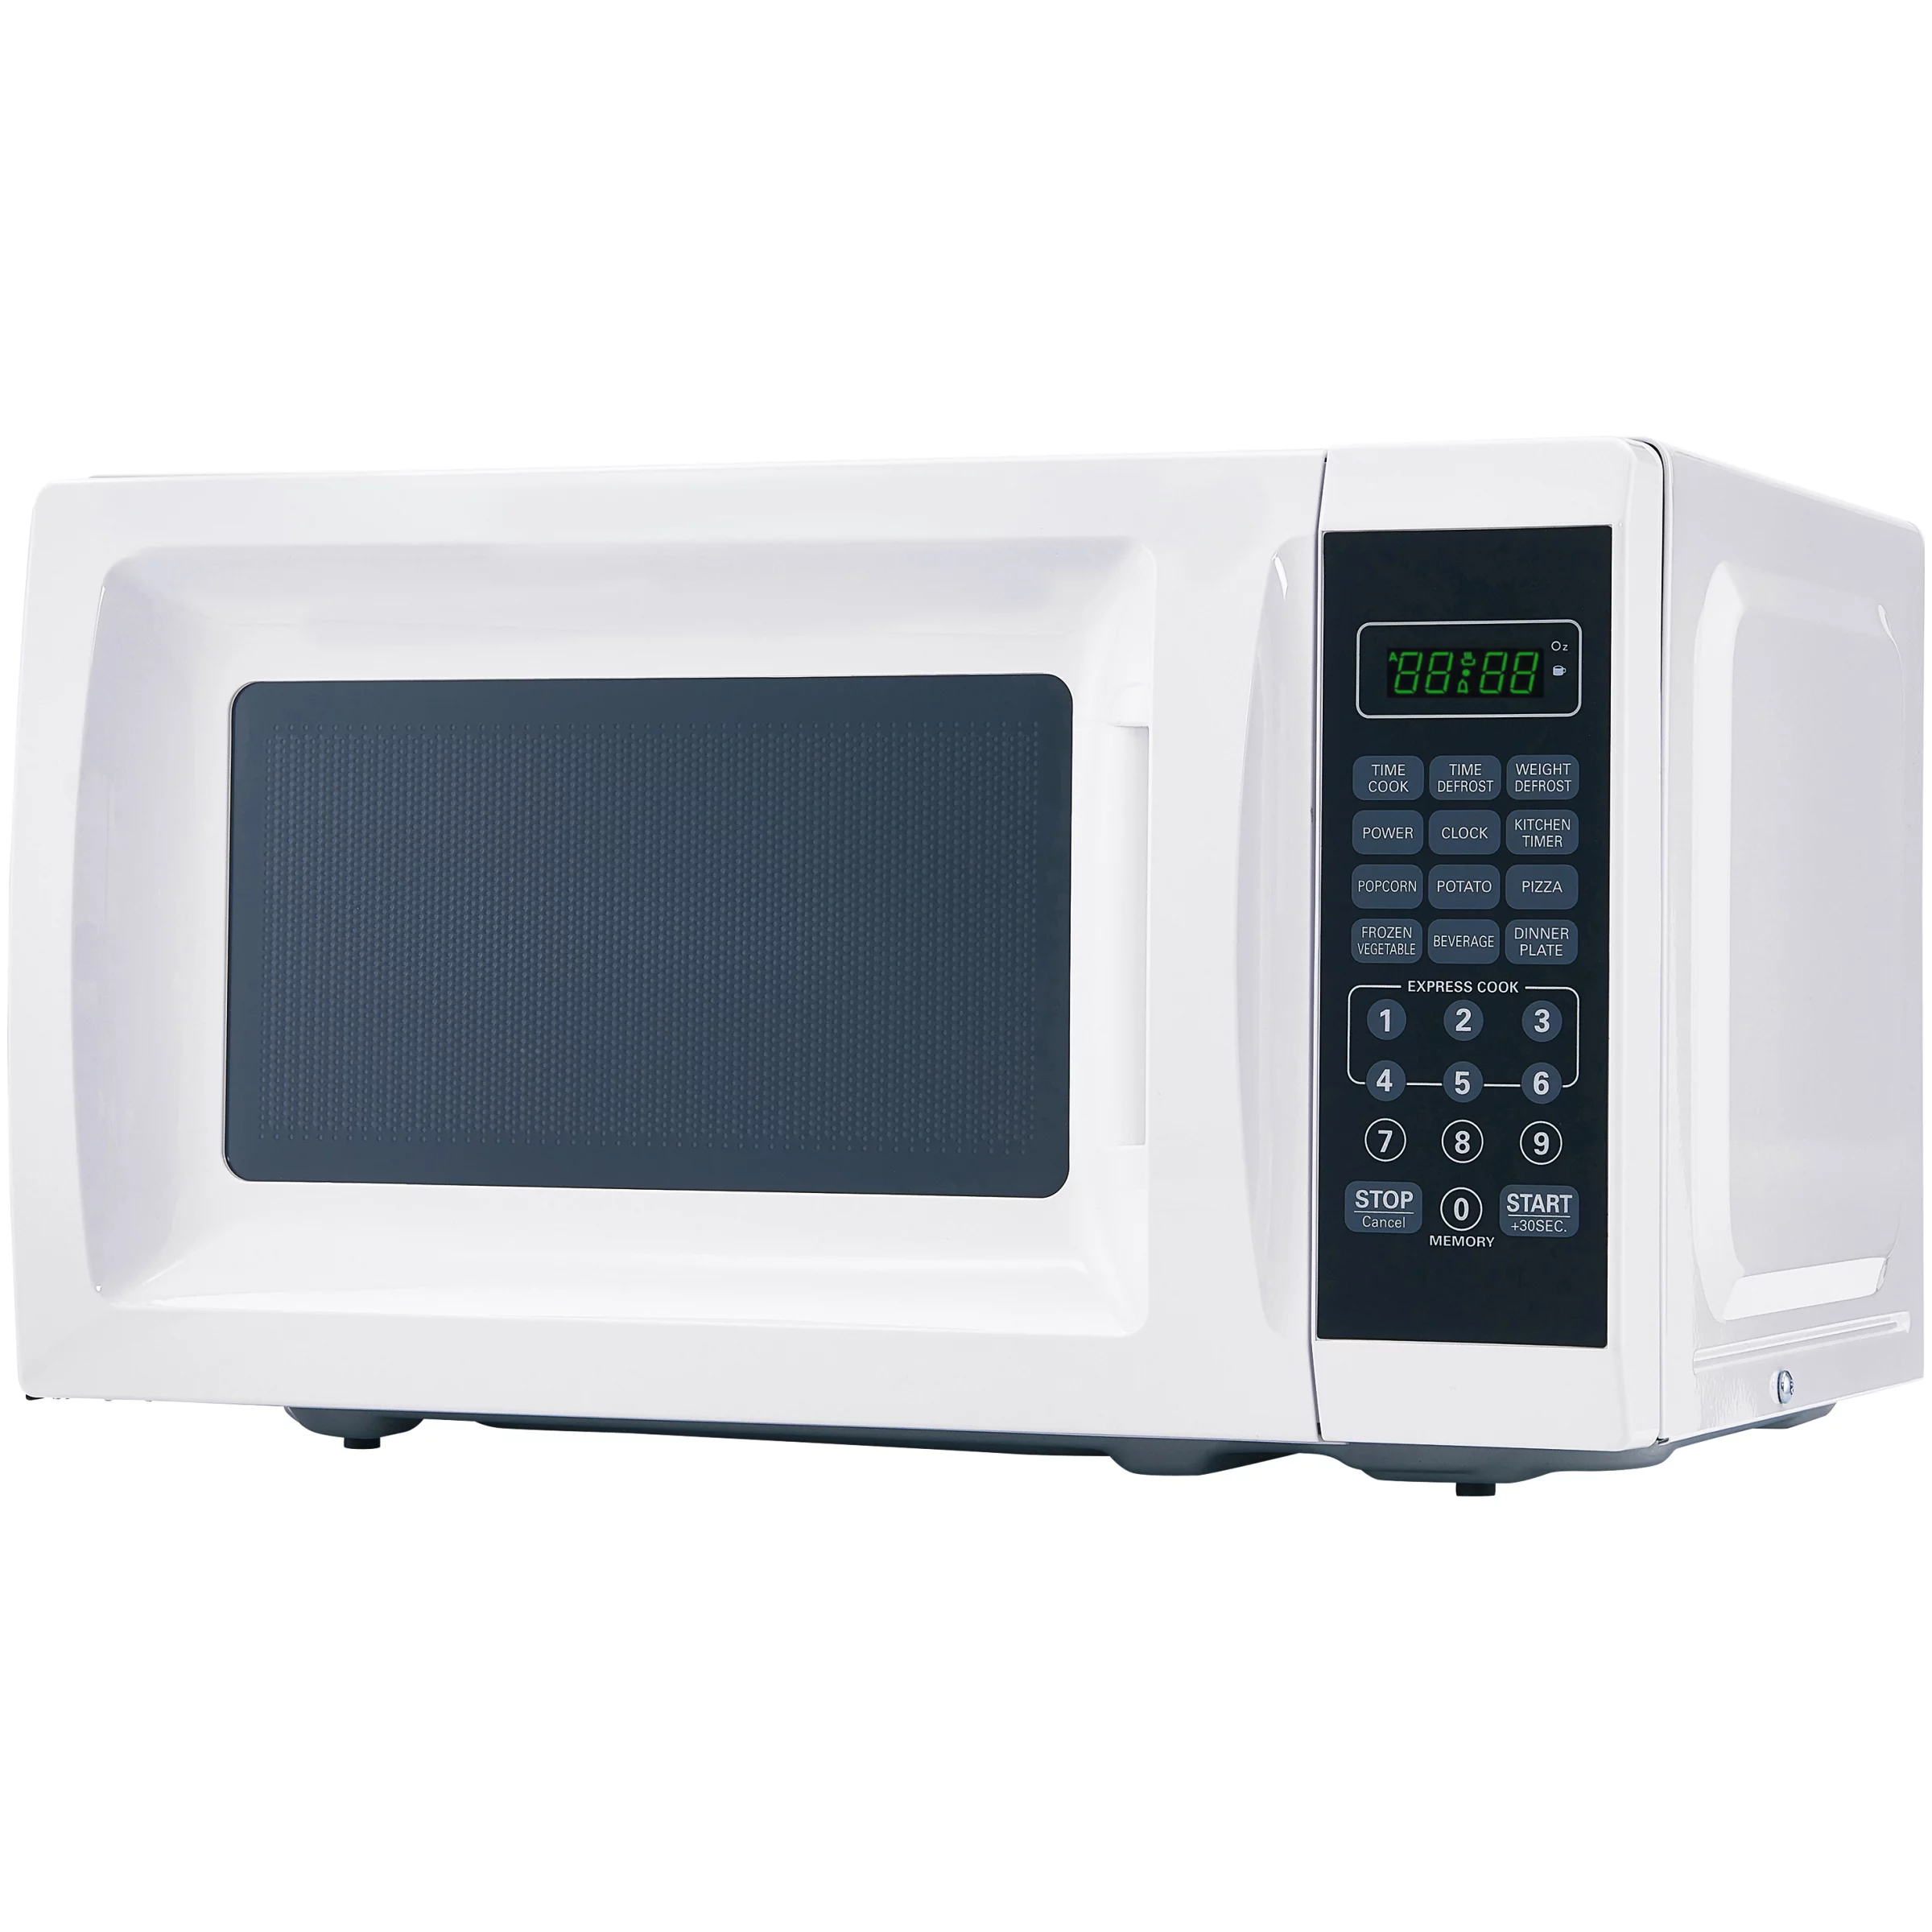 Mainstays 0.7 Cu. Ft. 700W White Microwave Oven